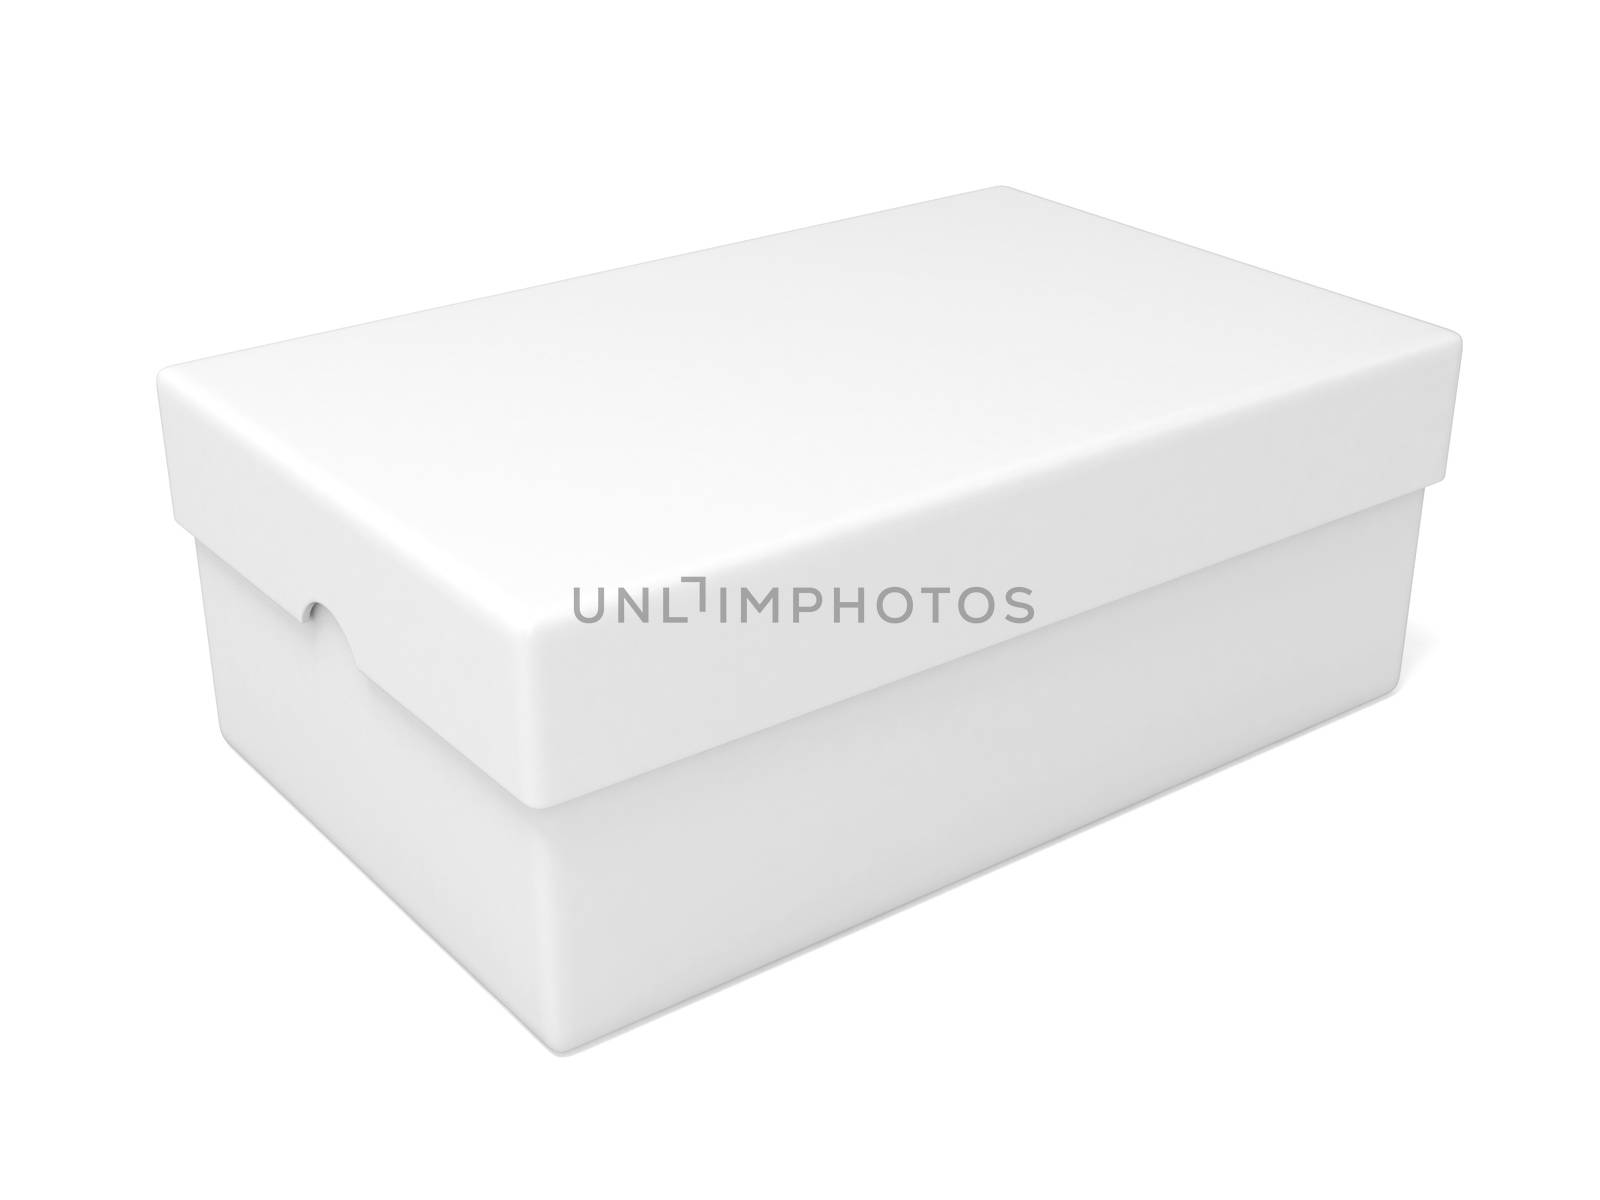 Closed white box, 3D render illustration isolated on white background